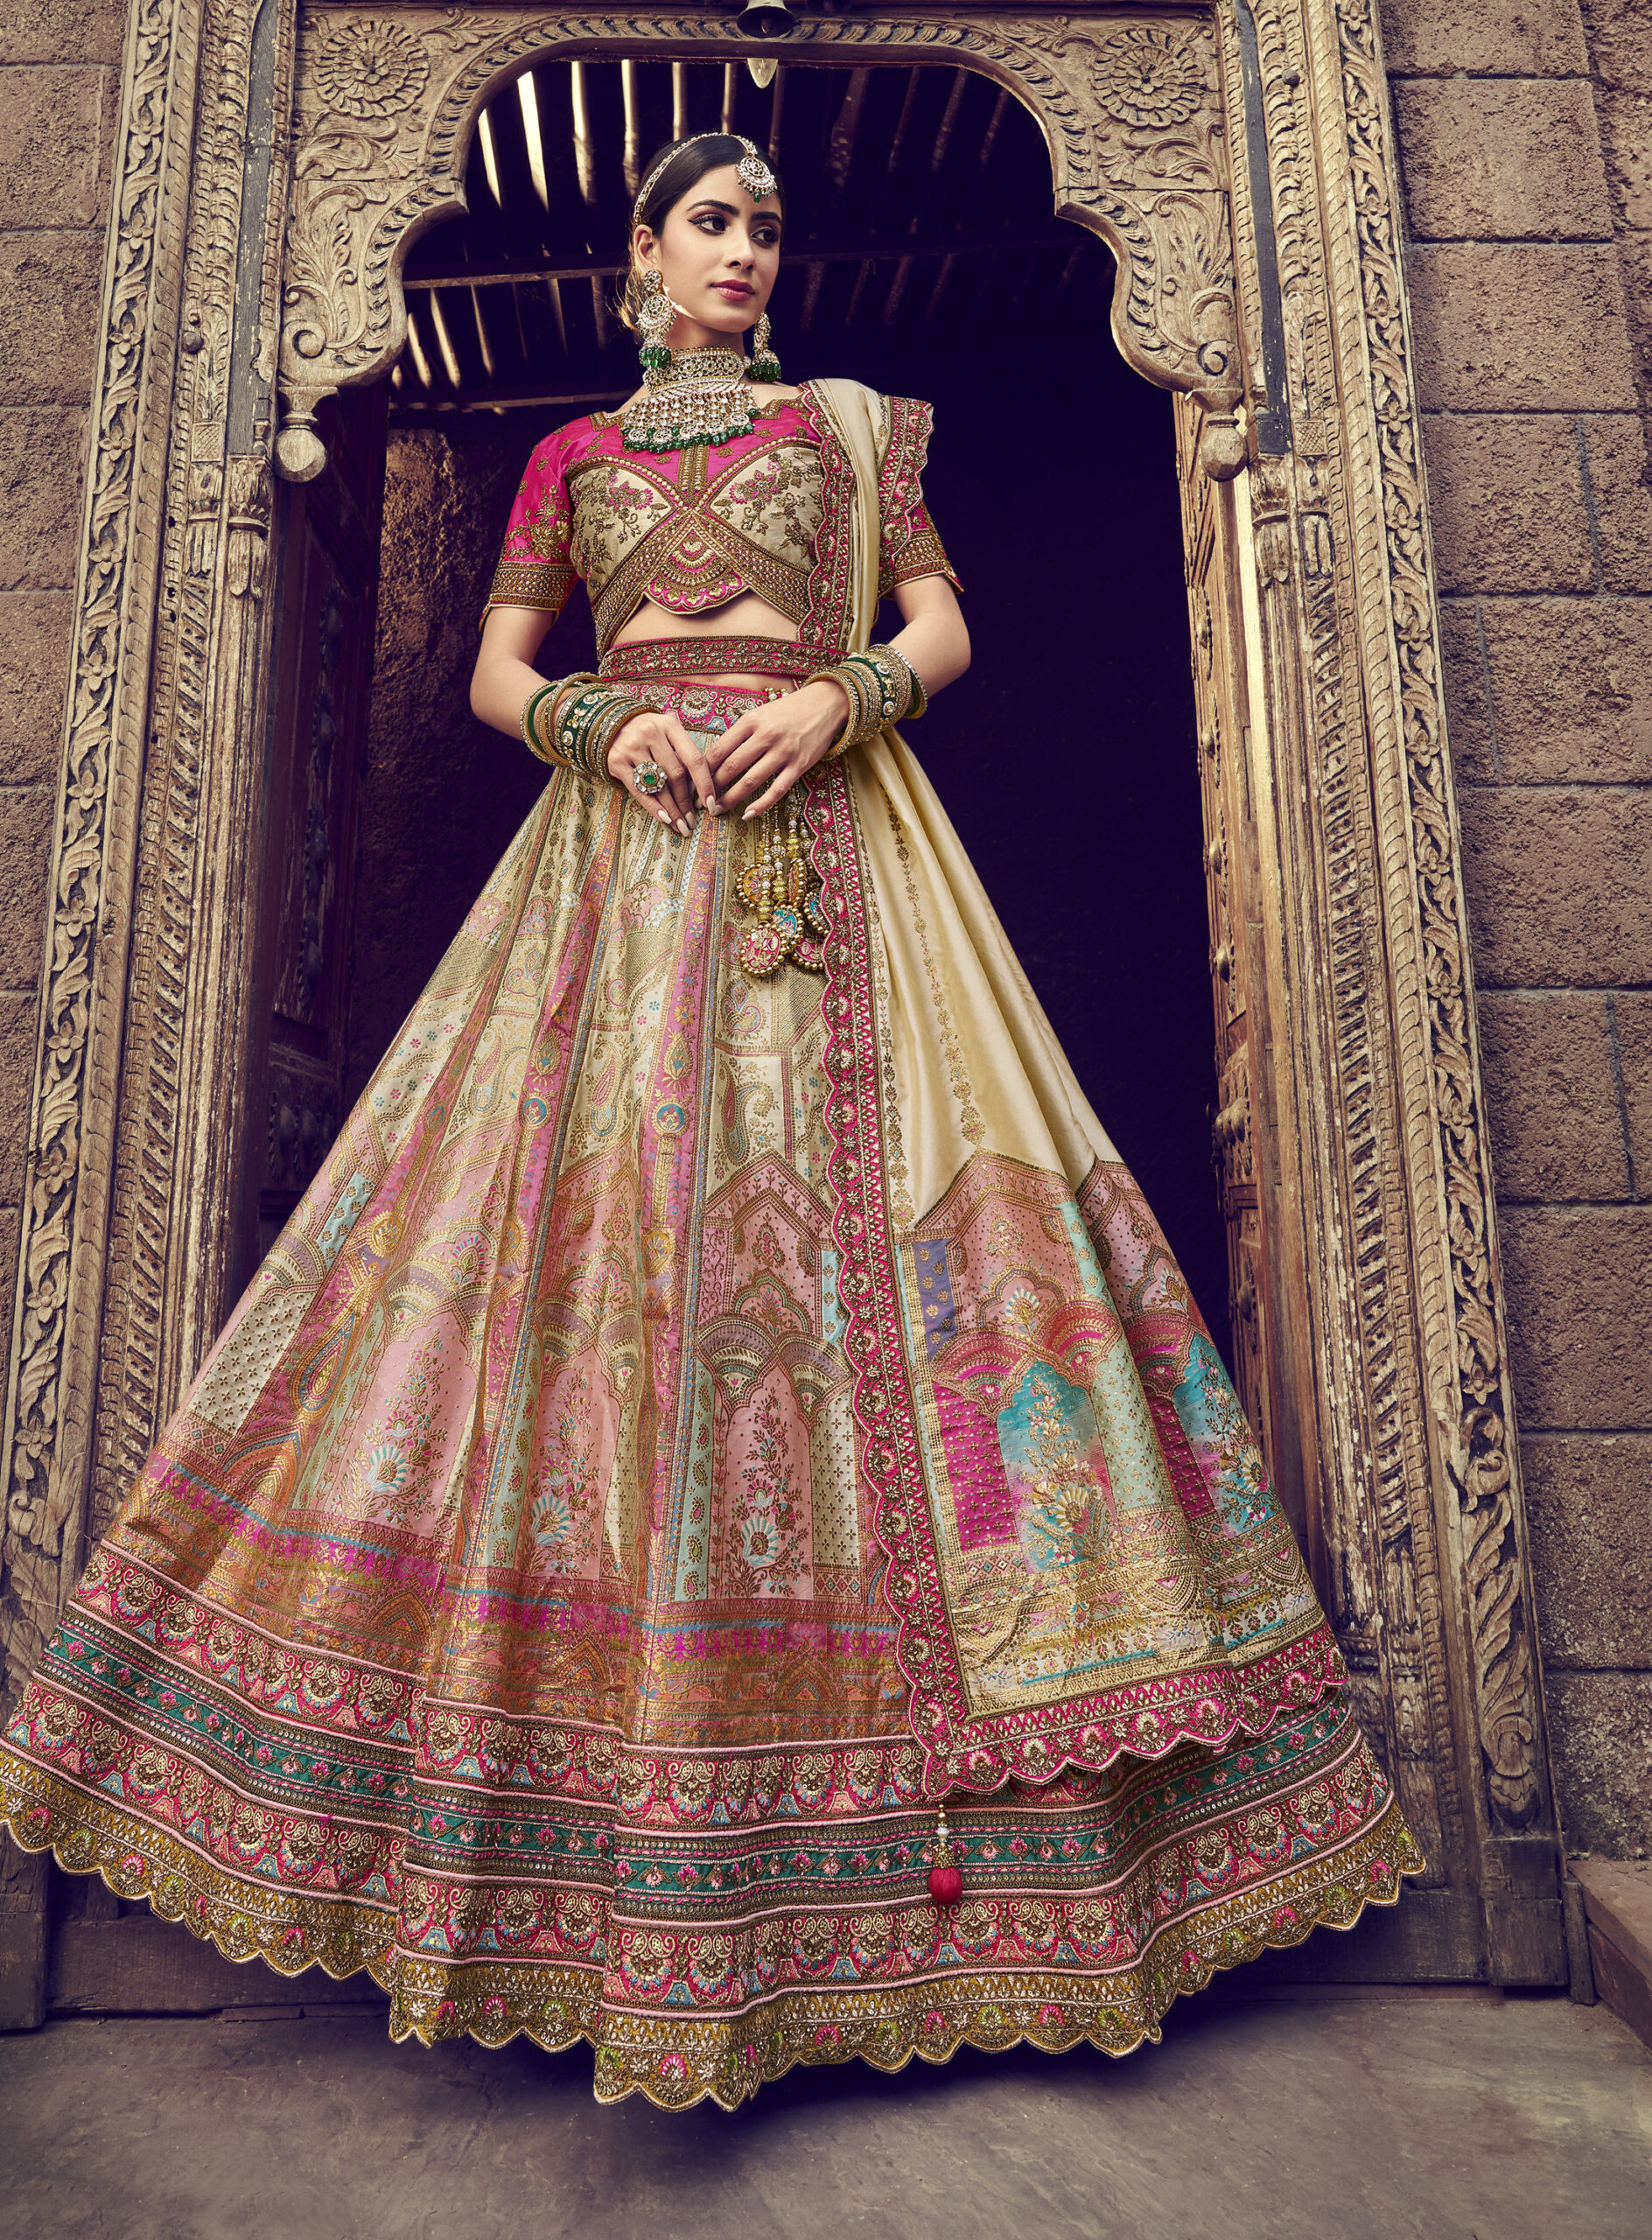 fcity.in - Lehenga Designs For Women Long Skirts For Wholesale Party Wear